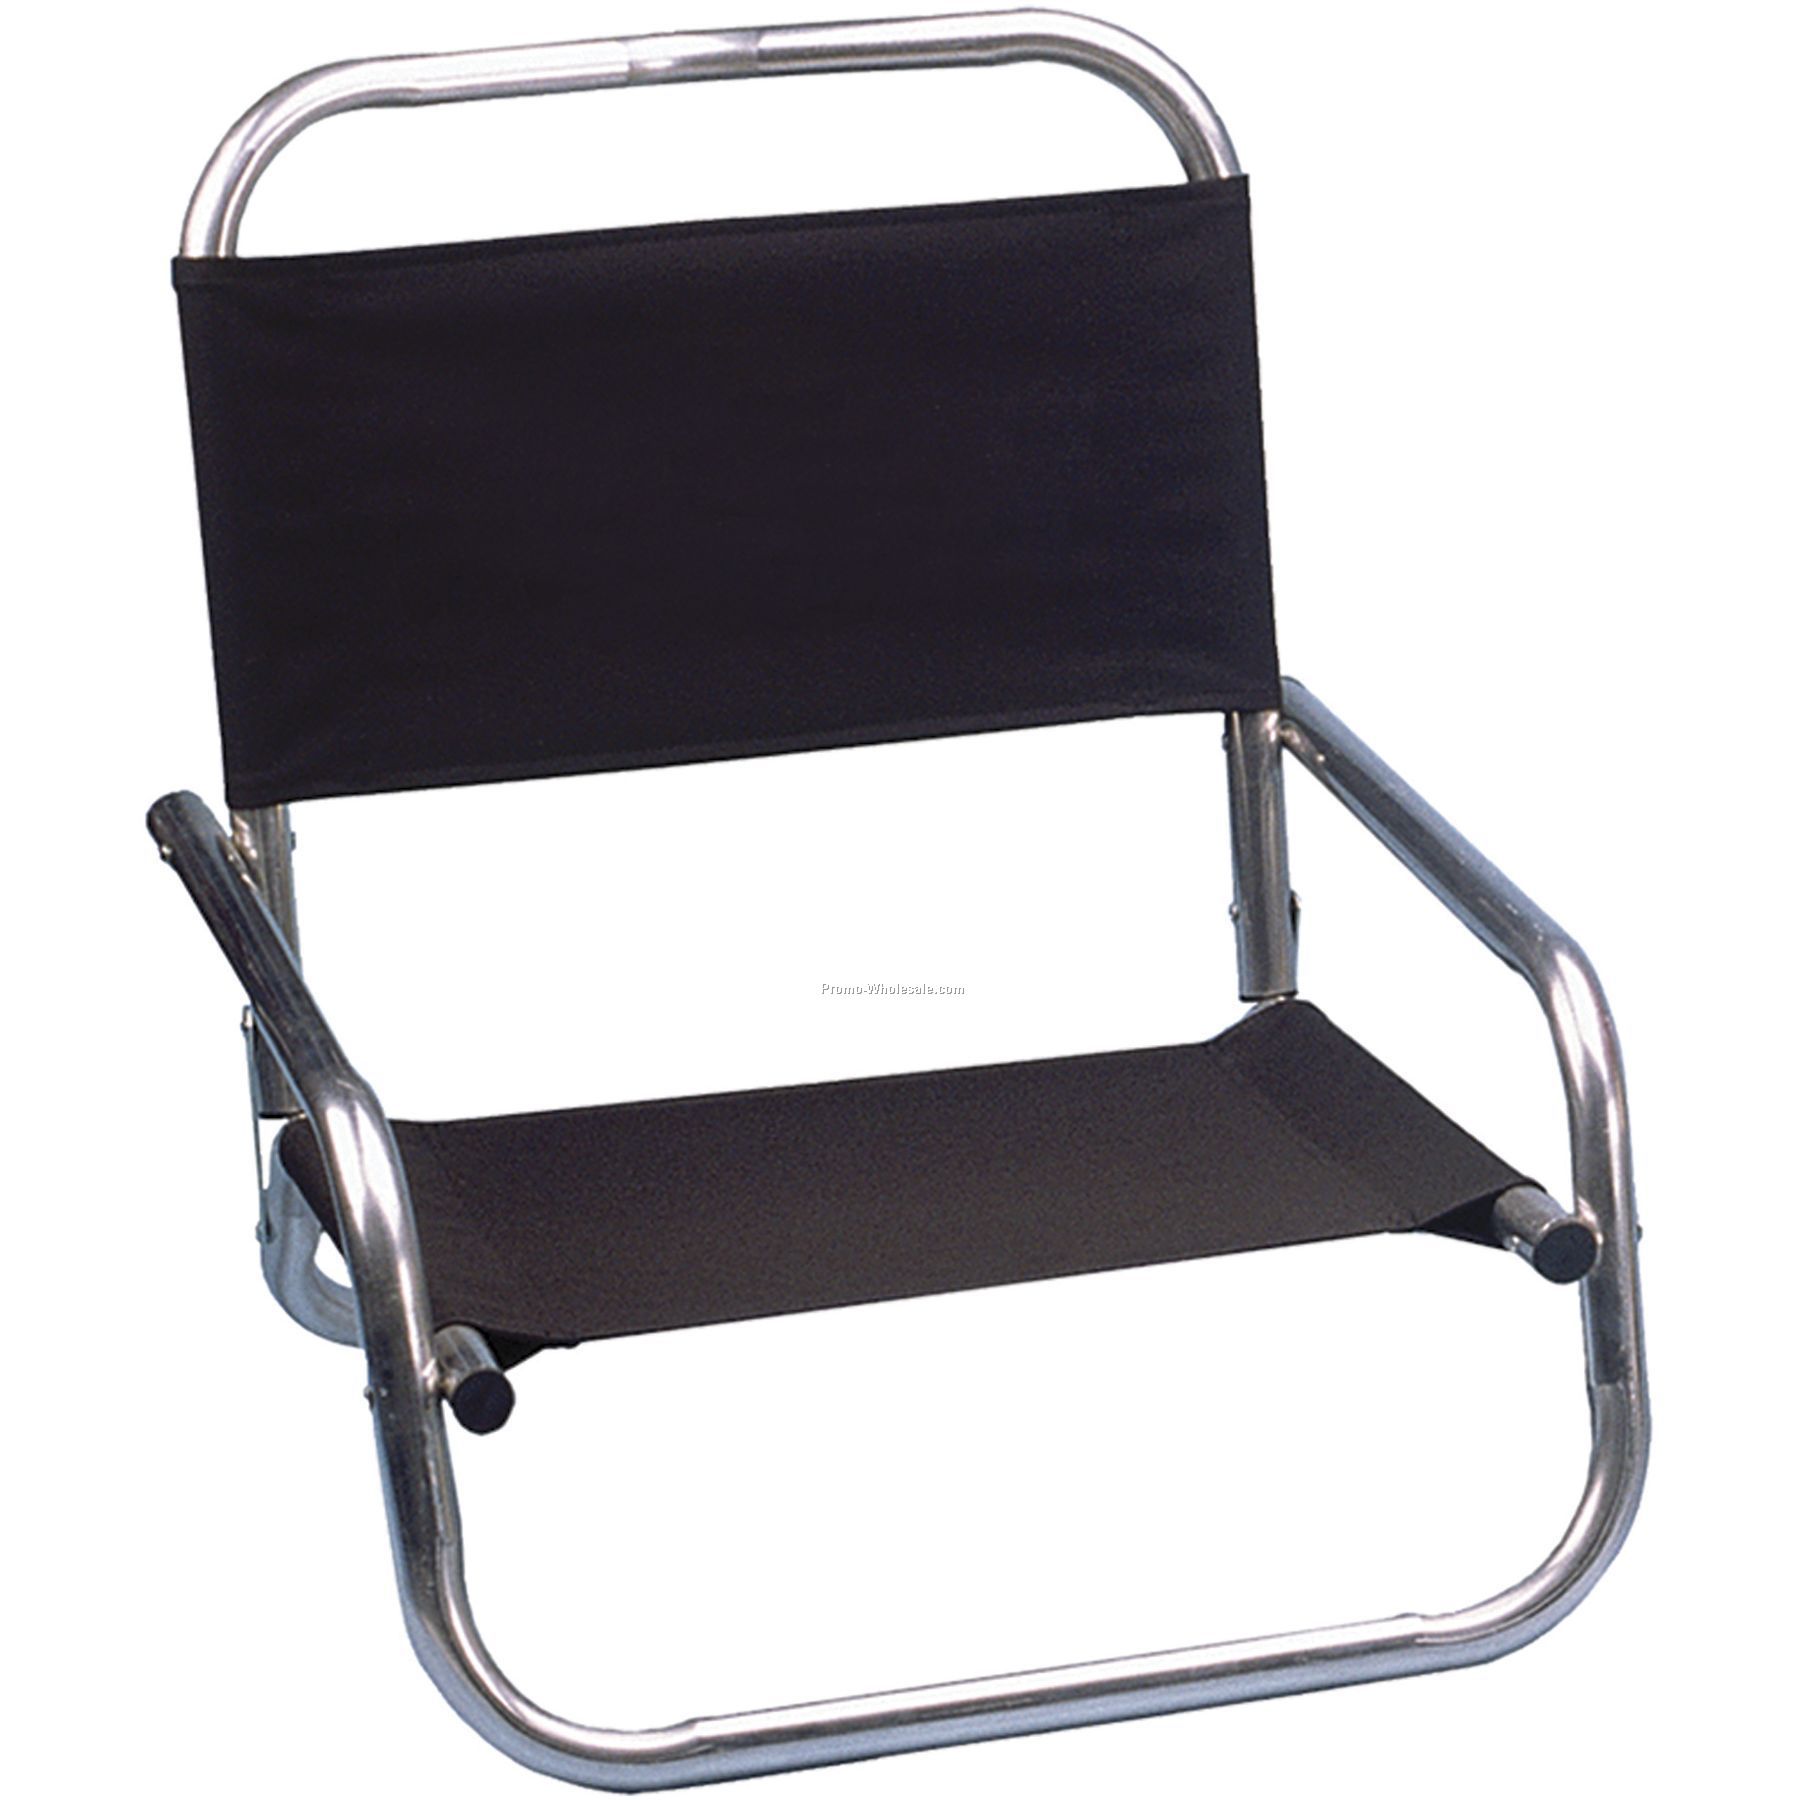 Standard Low Back Beach Chair (Full Color Digital Or 1 Color)